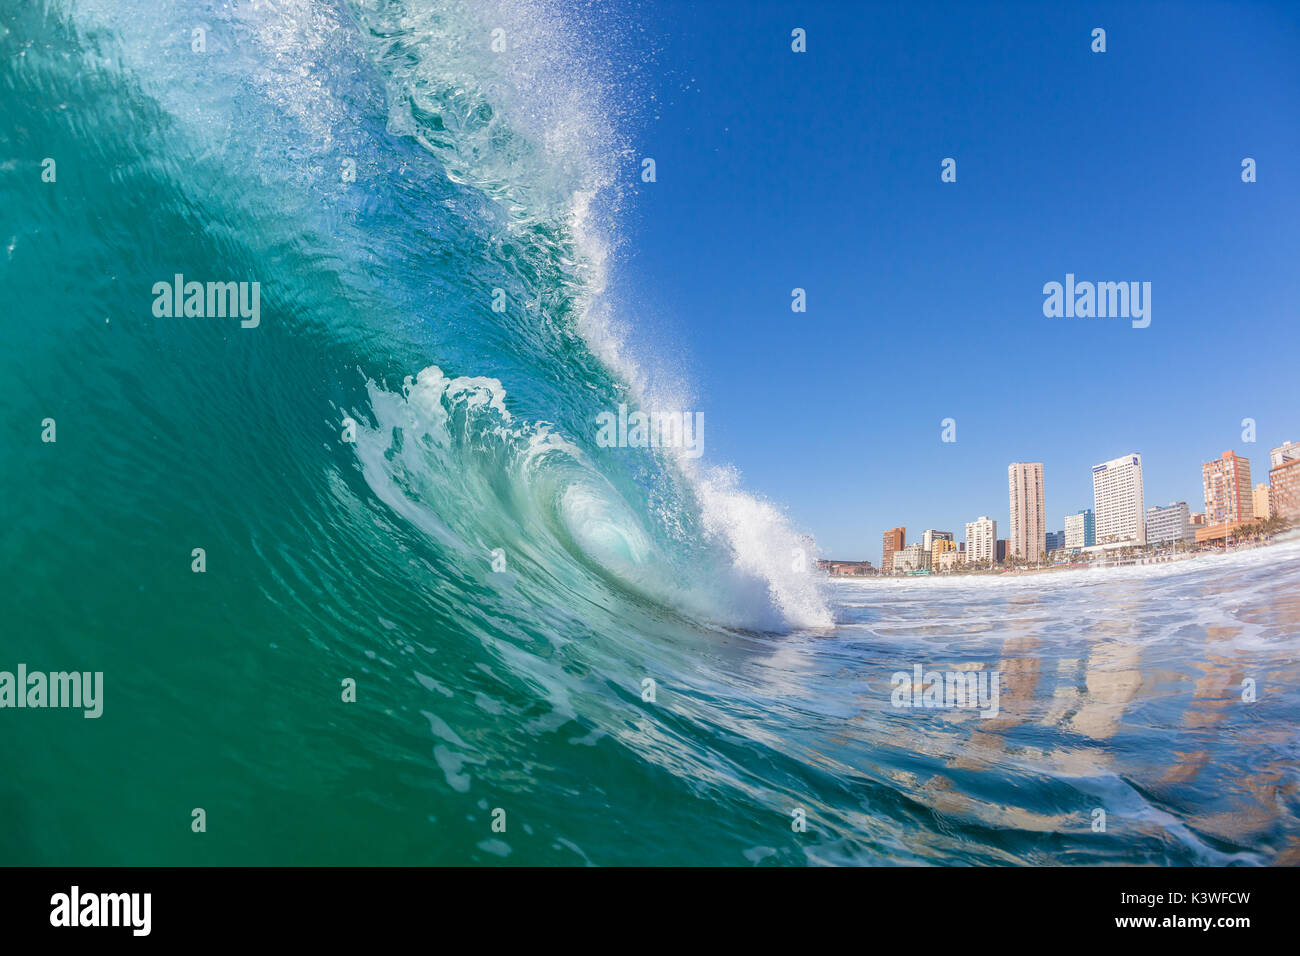 Ocean wave power surfing surfer view inside out hollow crashing tube along Durban beachfront. Stock Photo